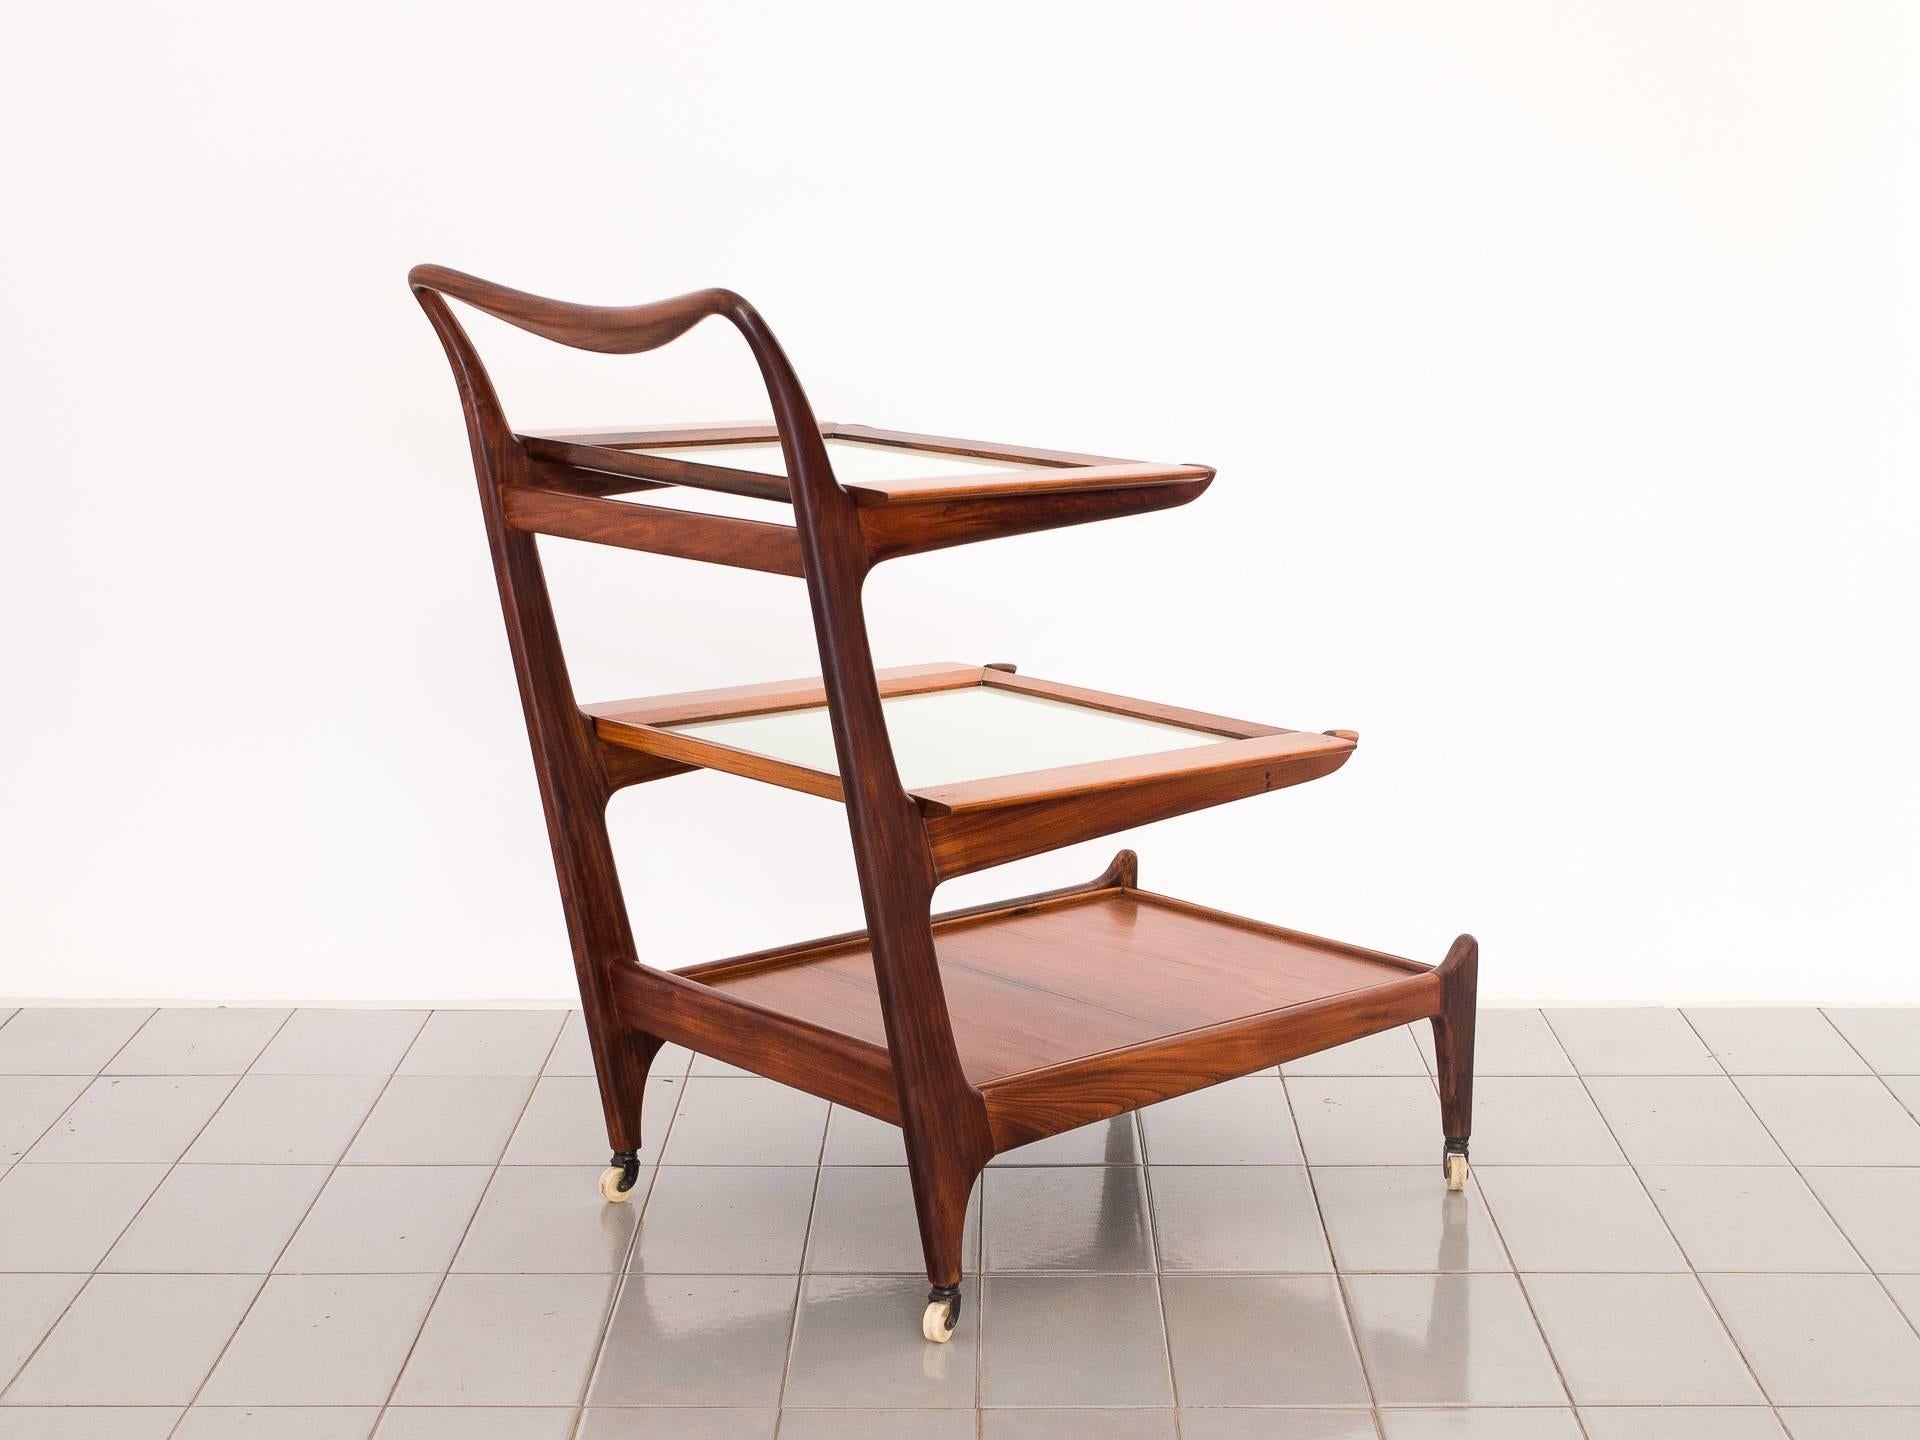 Being an Italian and having arrived in Brazil in the late 1940s, it would be impossible that Hauner wasn't influenced by his motherland's design output. This cart is clearly Italian inspired but is beautifully crafted in Caviúna wood, one of